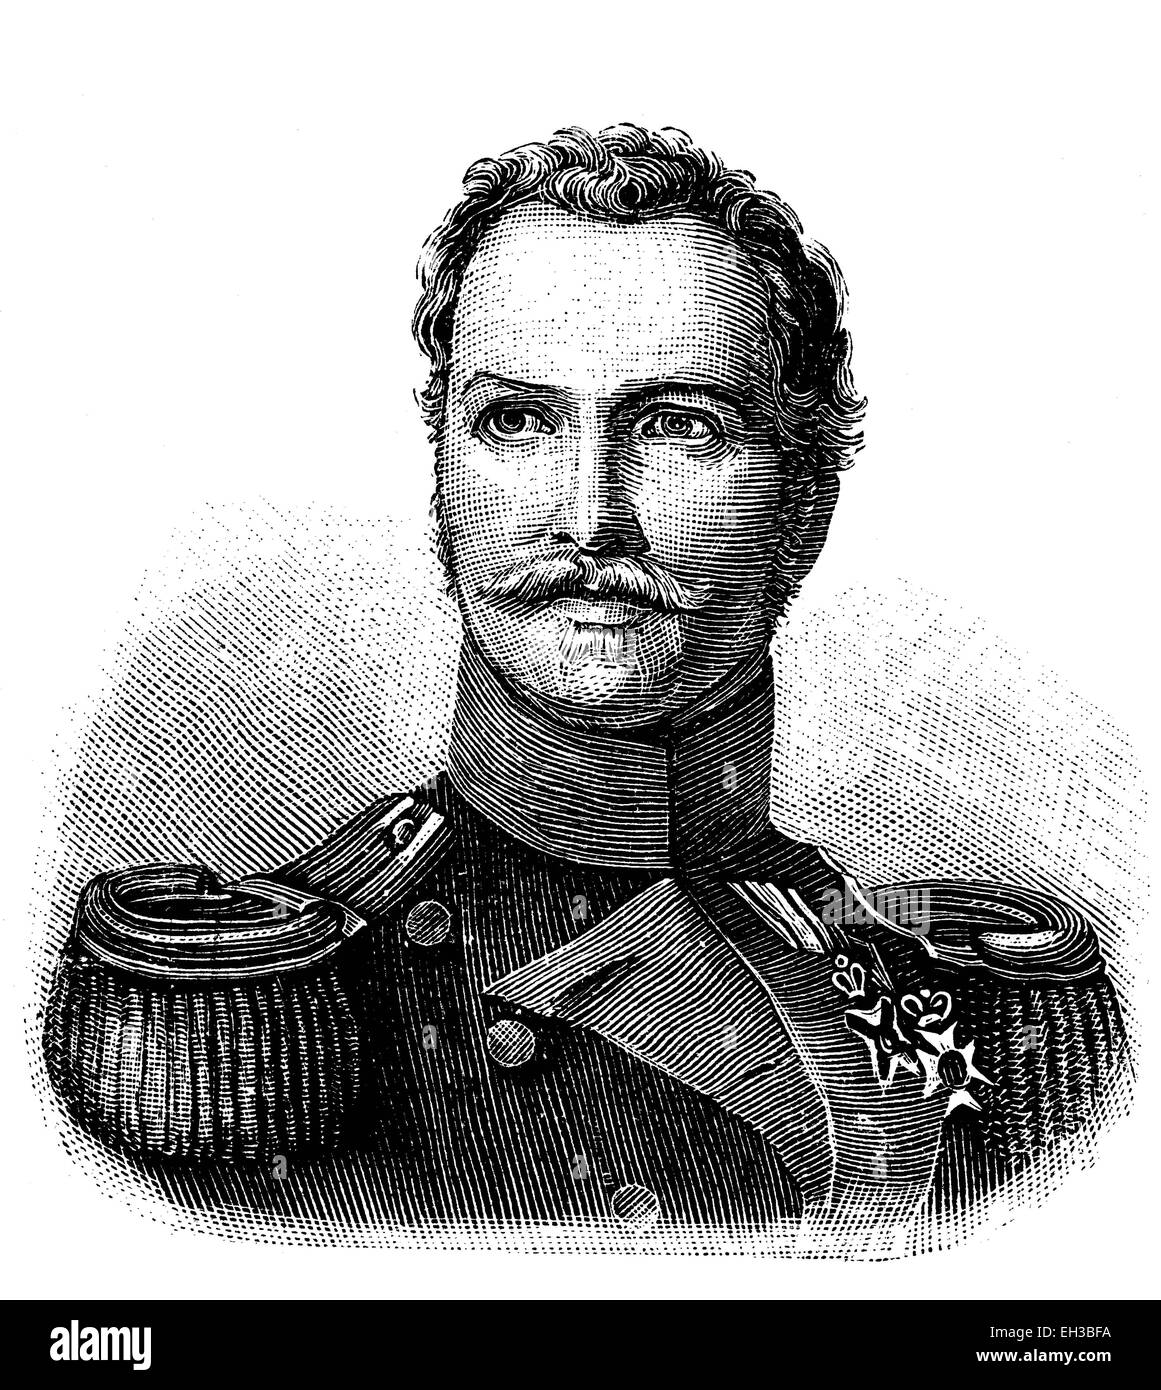 Friedrich Balduin Ludwig Freiherr von Gagern, 1794 - 1848, a Dutch general of German descent, Commander of the troops of the German Confederation fighting against the Heckeraufstand uprising, wood engraving, about 1880 Stock Photo